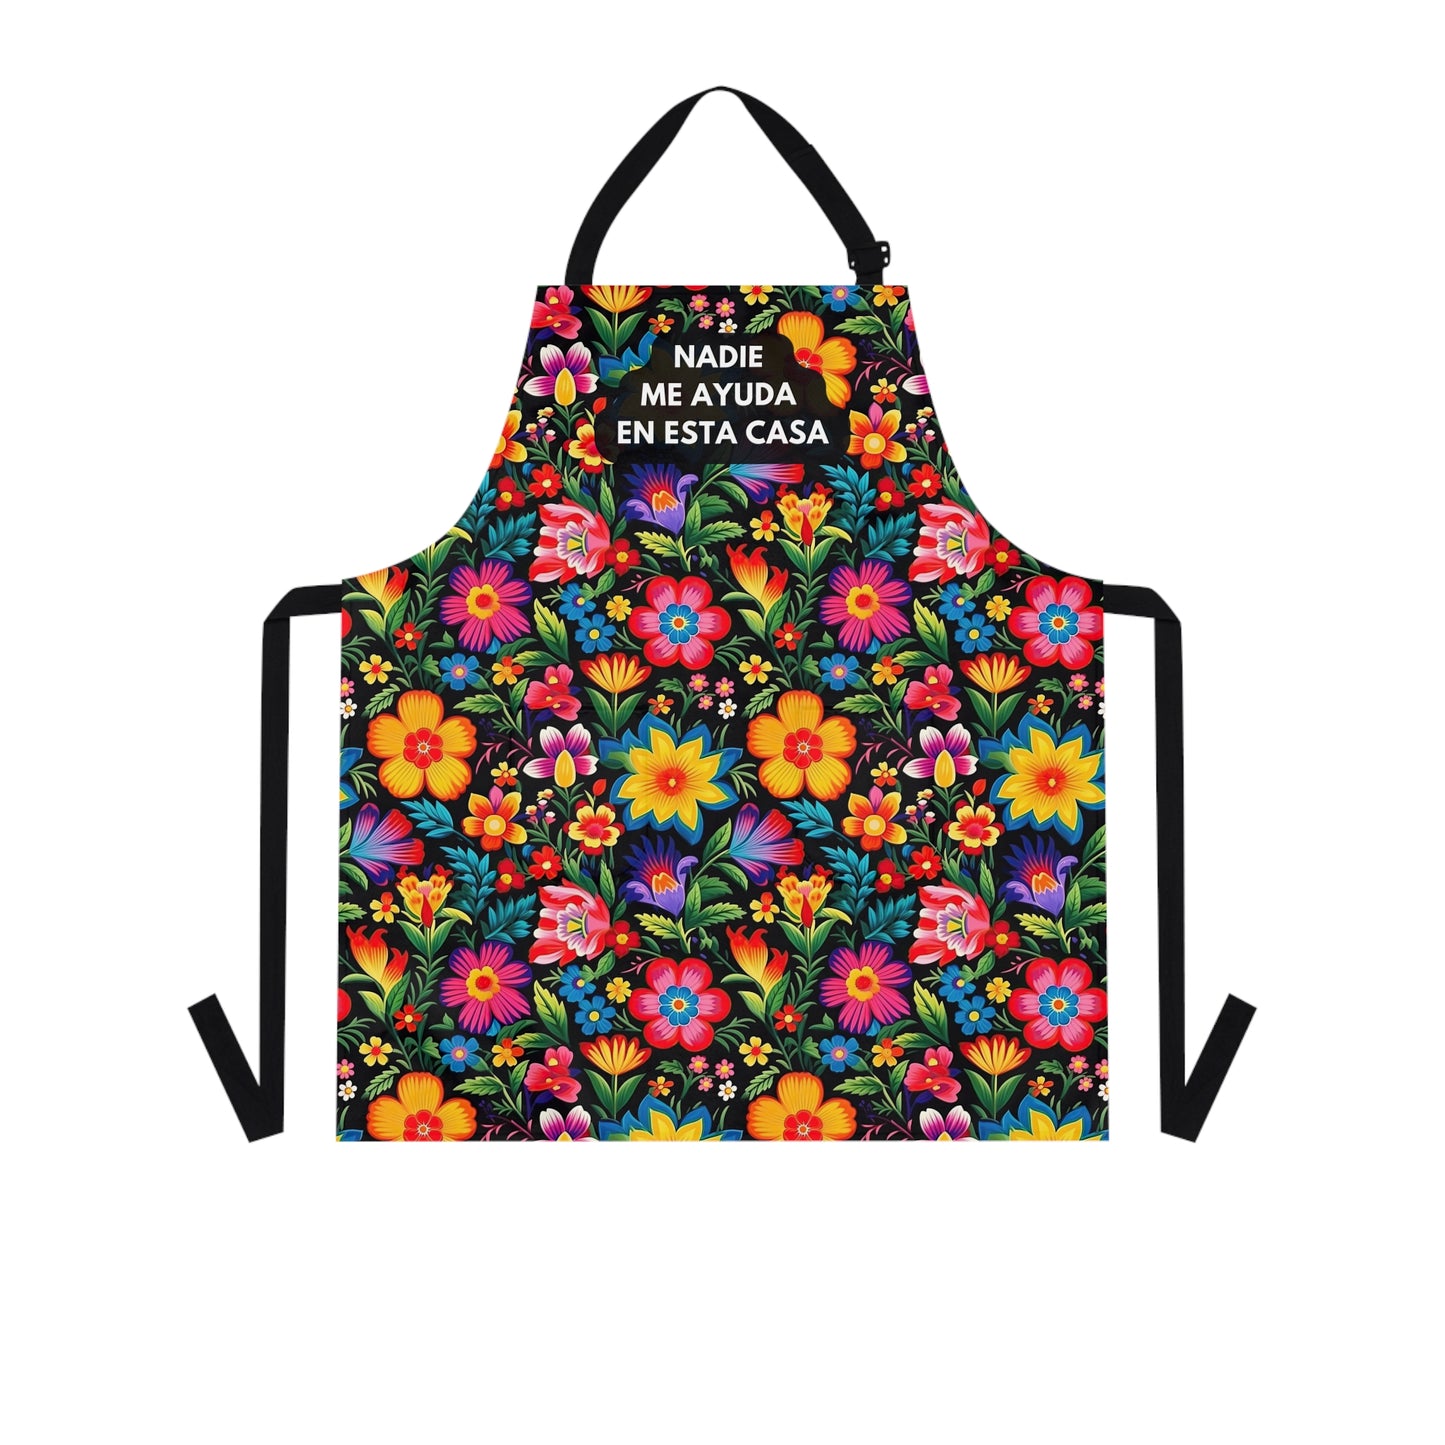 Nadie me ayuda en esta casa mandil for Mexican mom. Funny Mother’s Day gift for latin mom. Mexican Apron. Latin apron with colorful flowers.